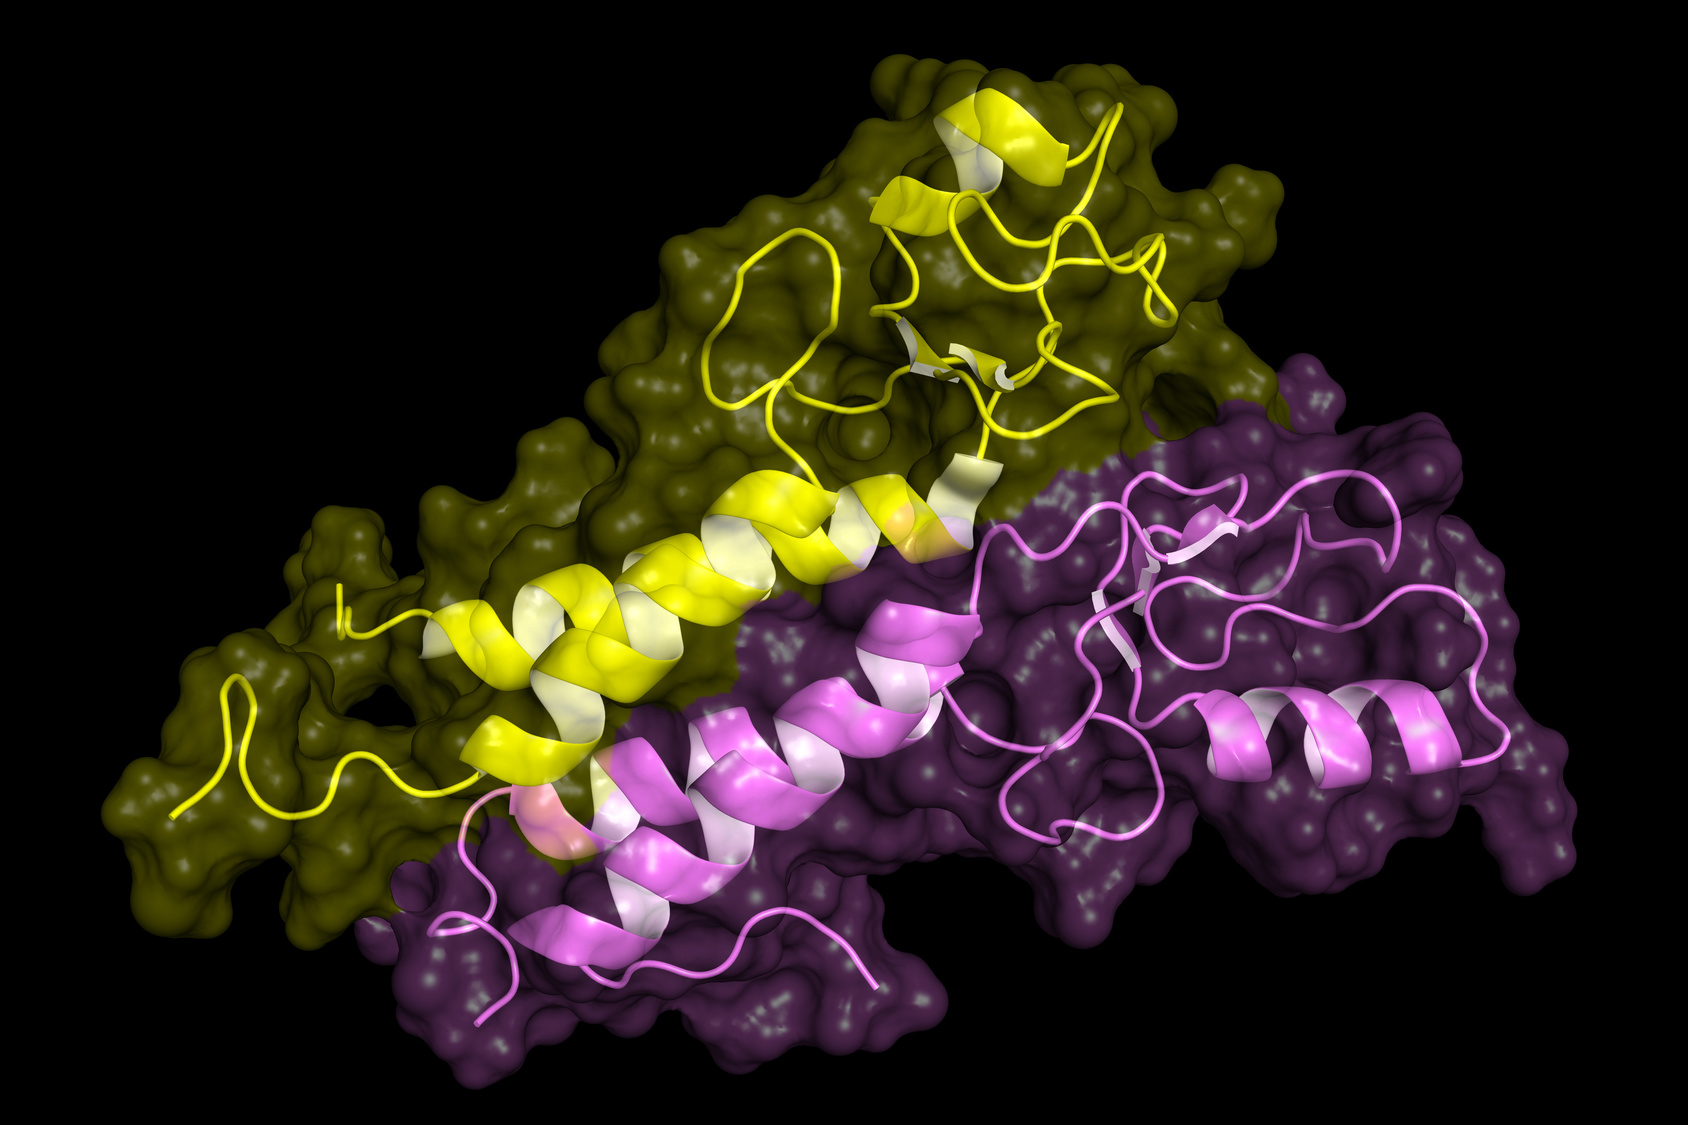 BRCA1 tumor supressor protein RING domain, in complex with BARD1 protein. BRCA1 mutations are implicated in hereditary breast, ovarian and prostate cancer.